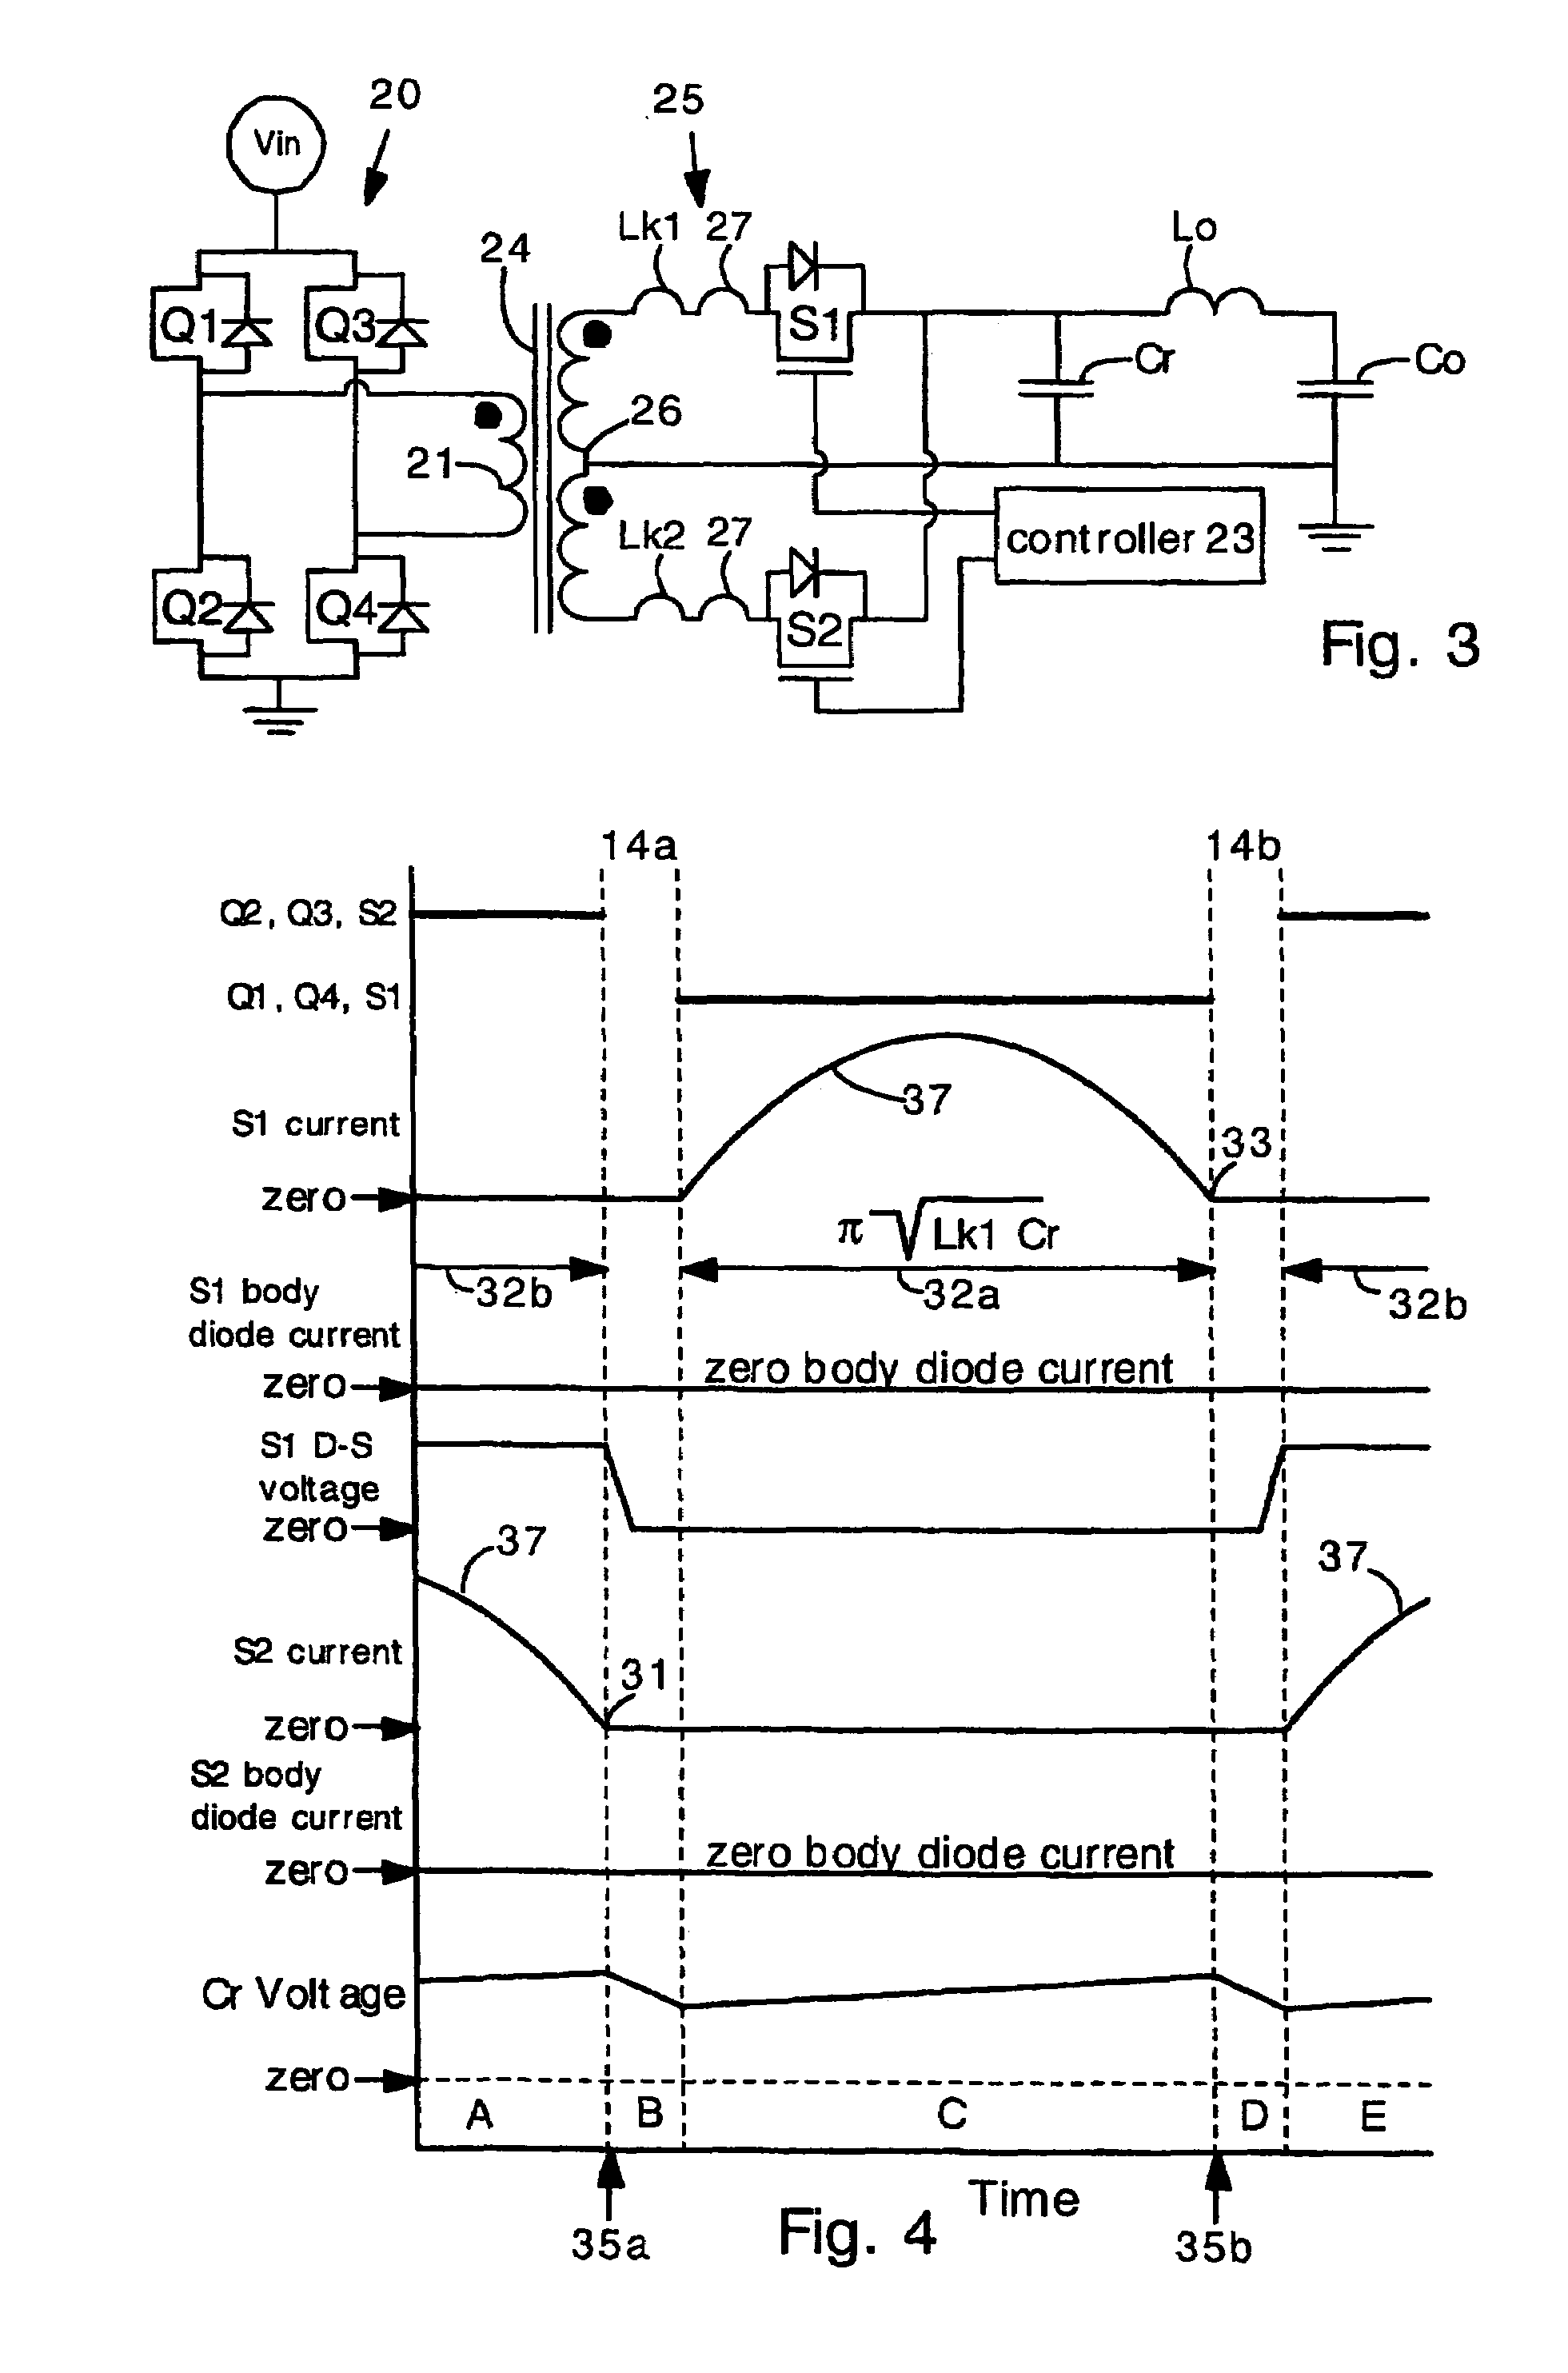 Power converters having capacitor resonant with transformer leakage inductance